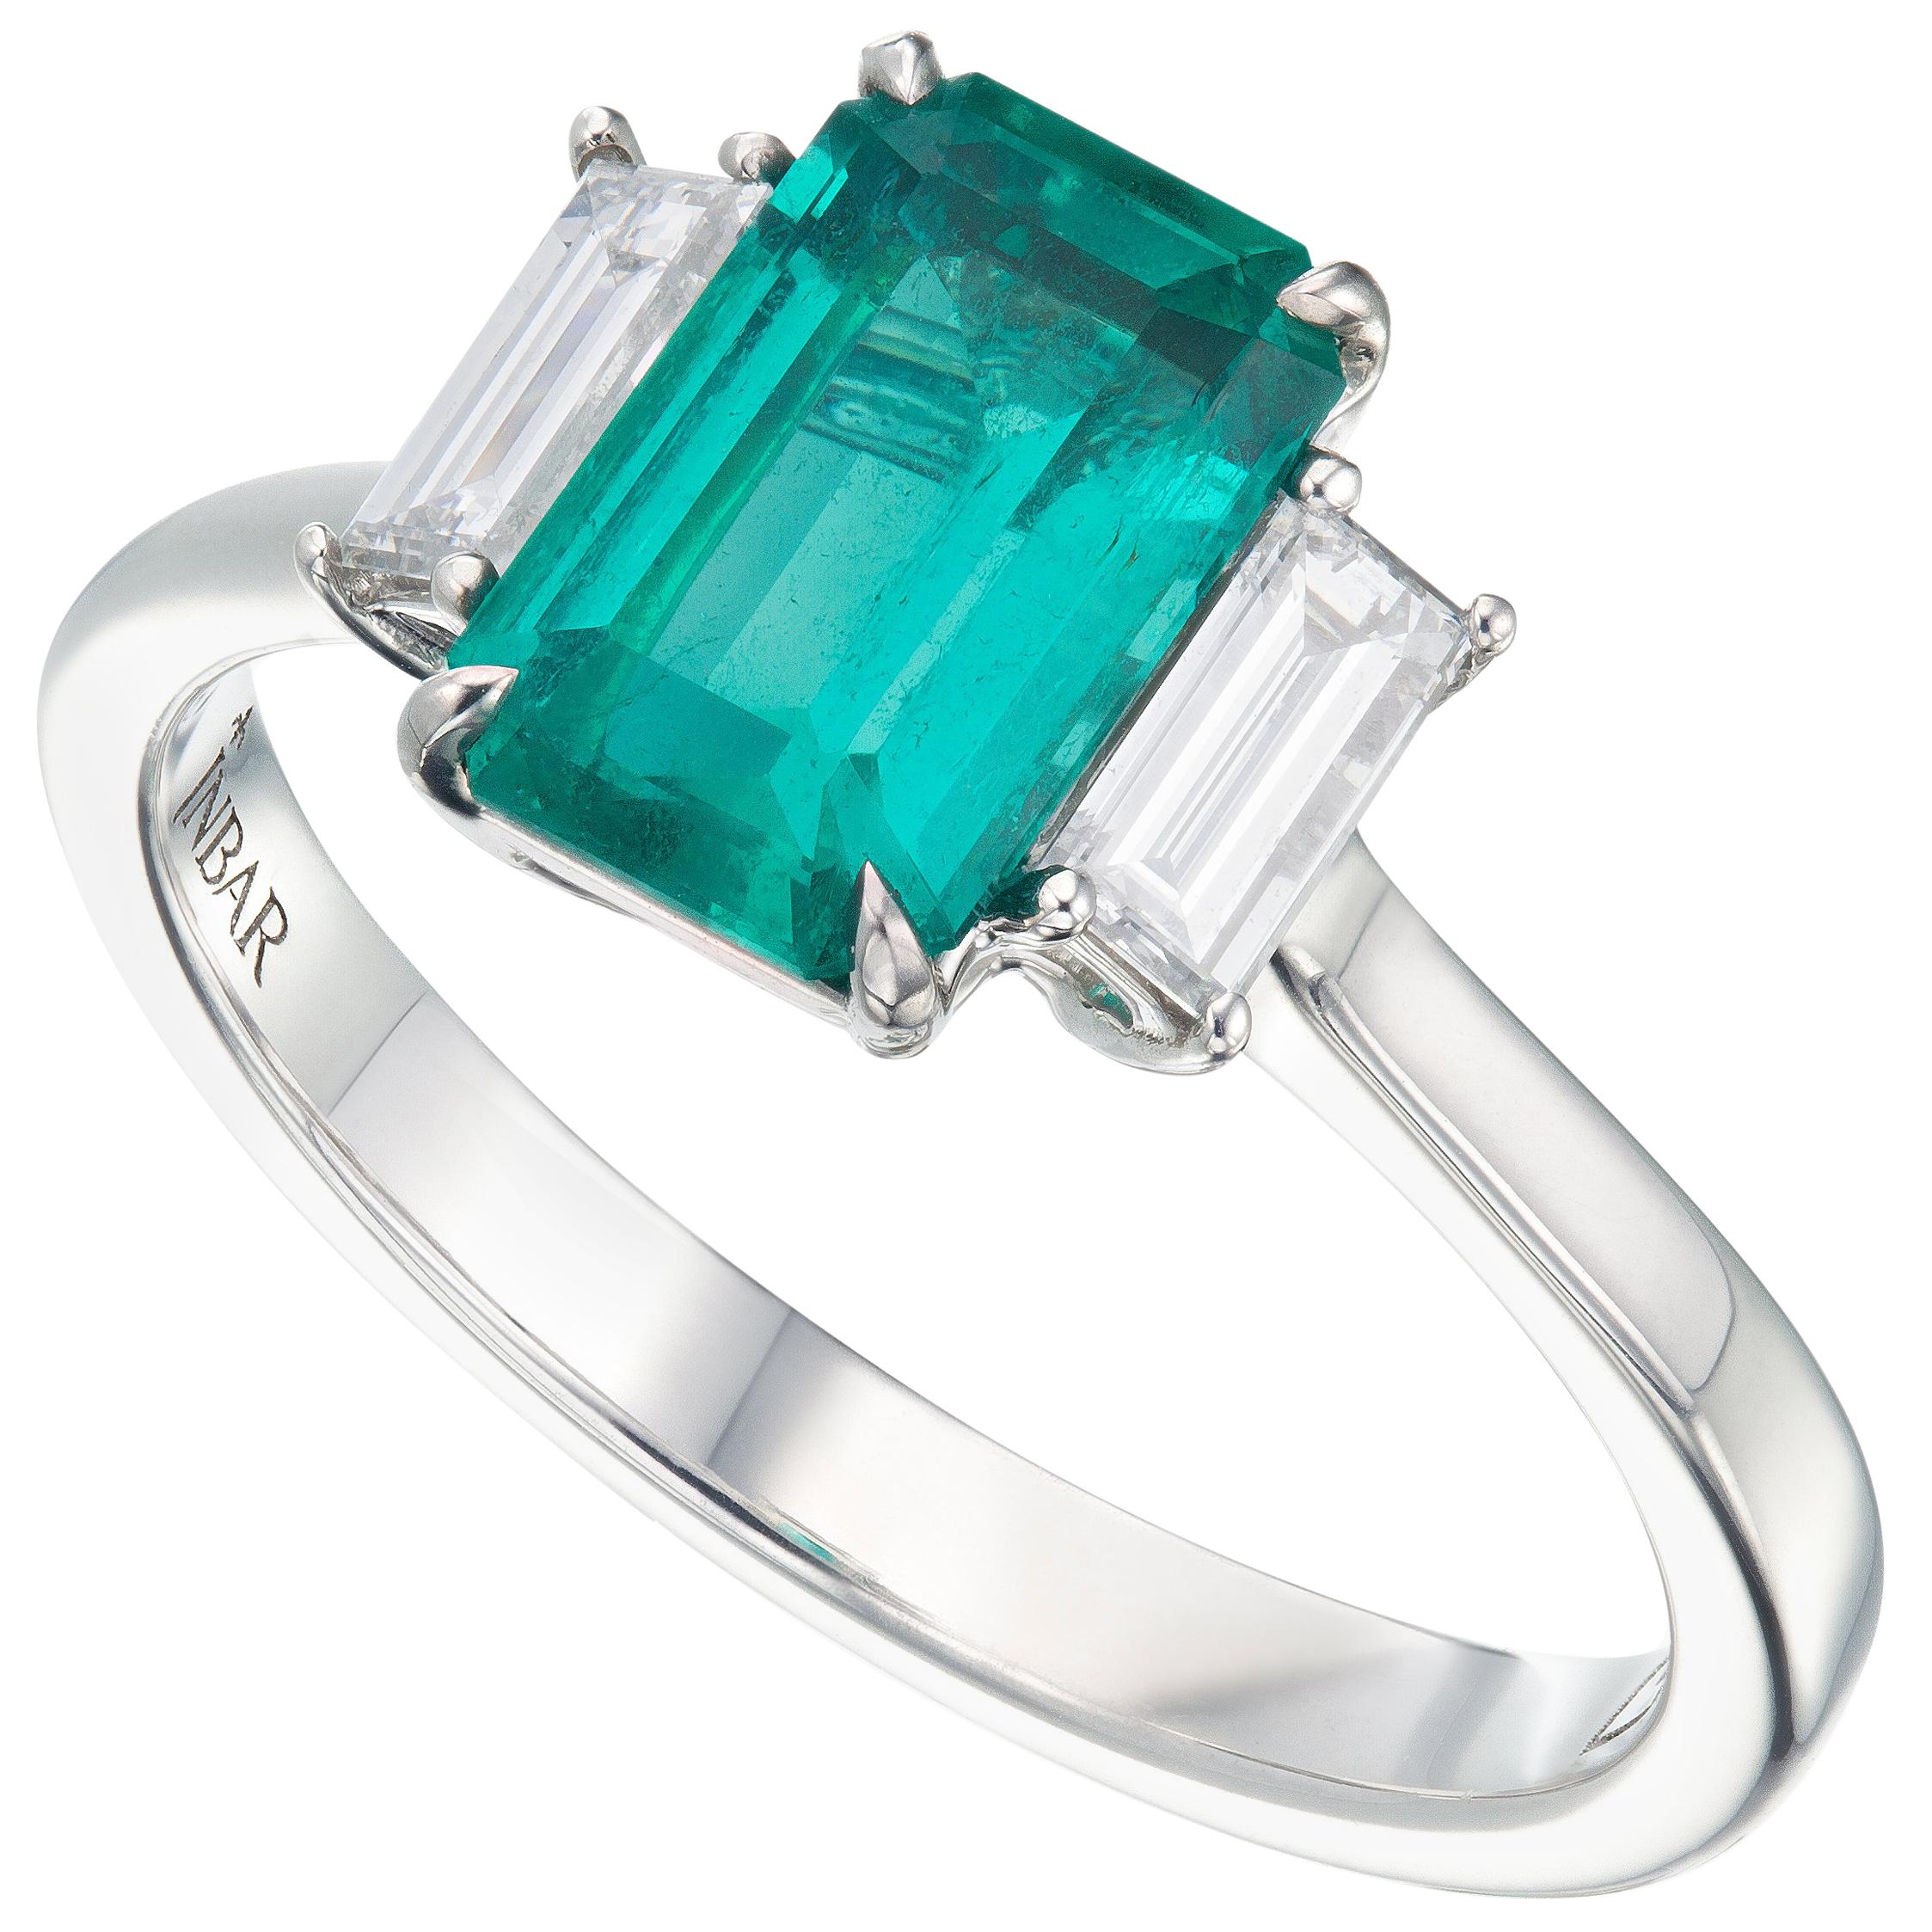 1.3 Carat Afghan Emerald and Diamond Ring For Sale